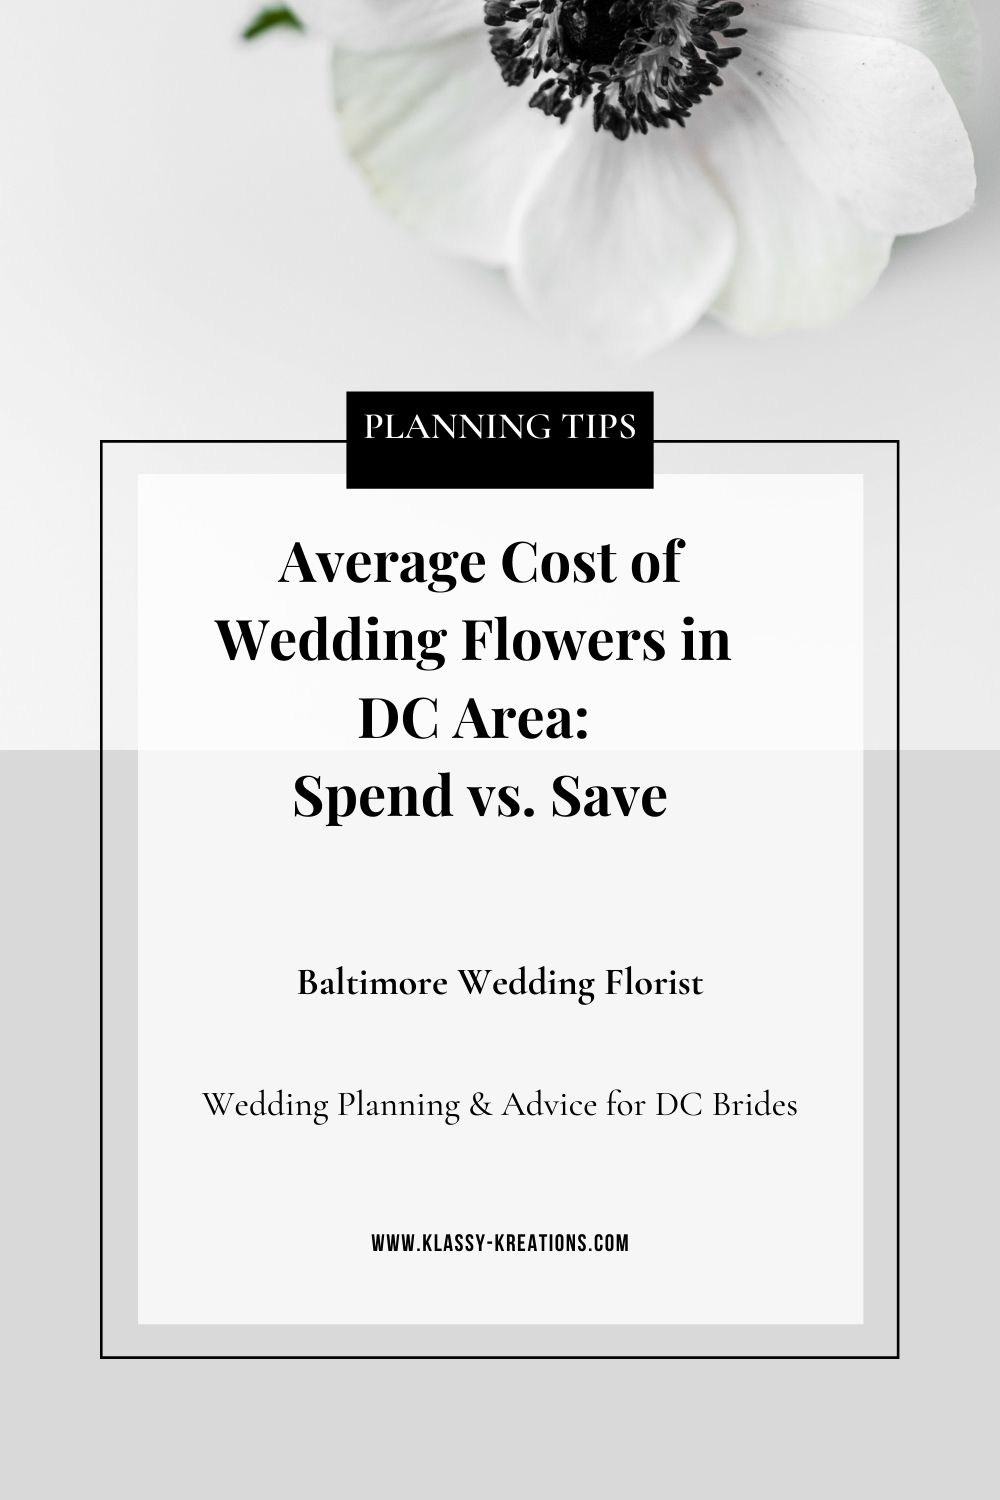 blog-post-tip-average-cost-of-wedding-flowers-in-dc-area-spend-vs-save